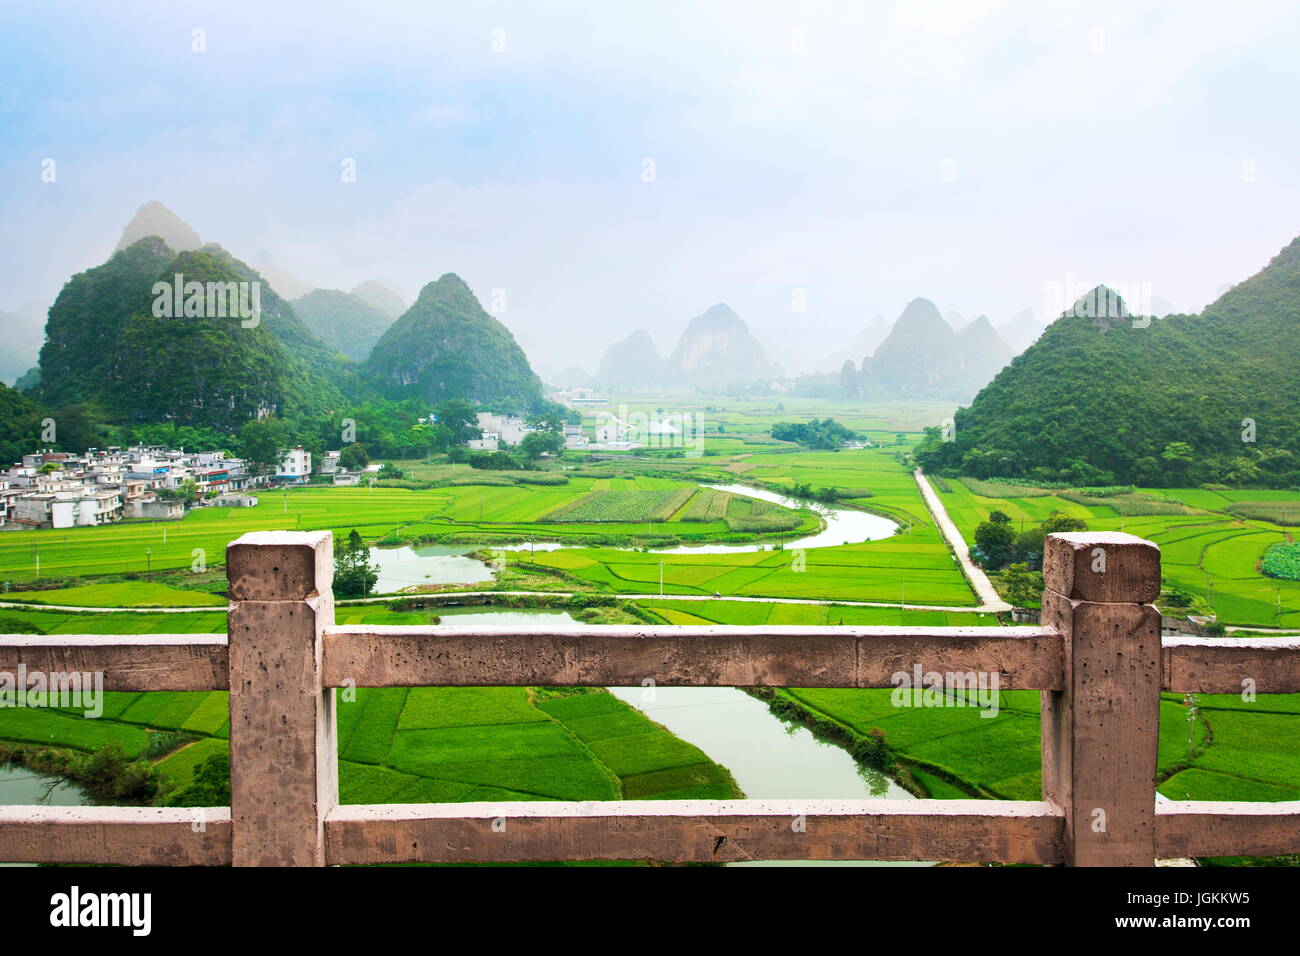 Stunning rice field view with karst formations in Guangxi, China Stock Photo